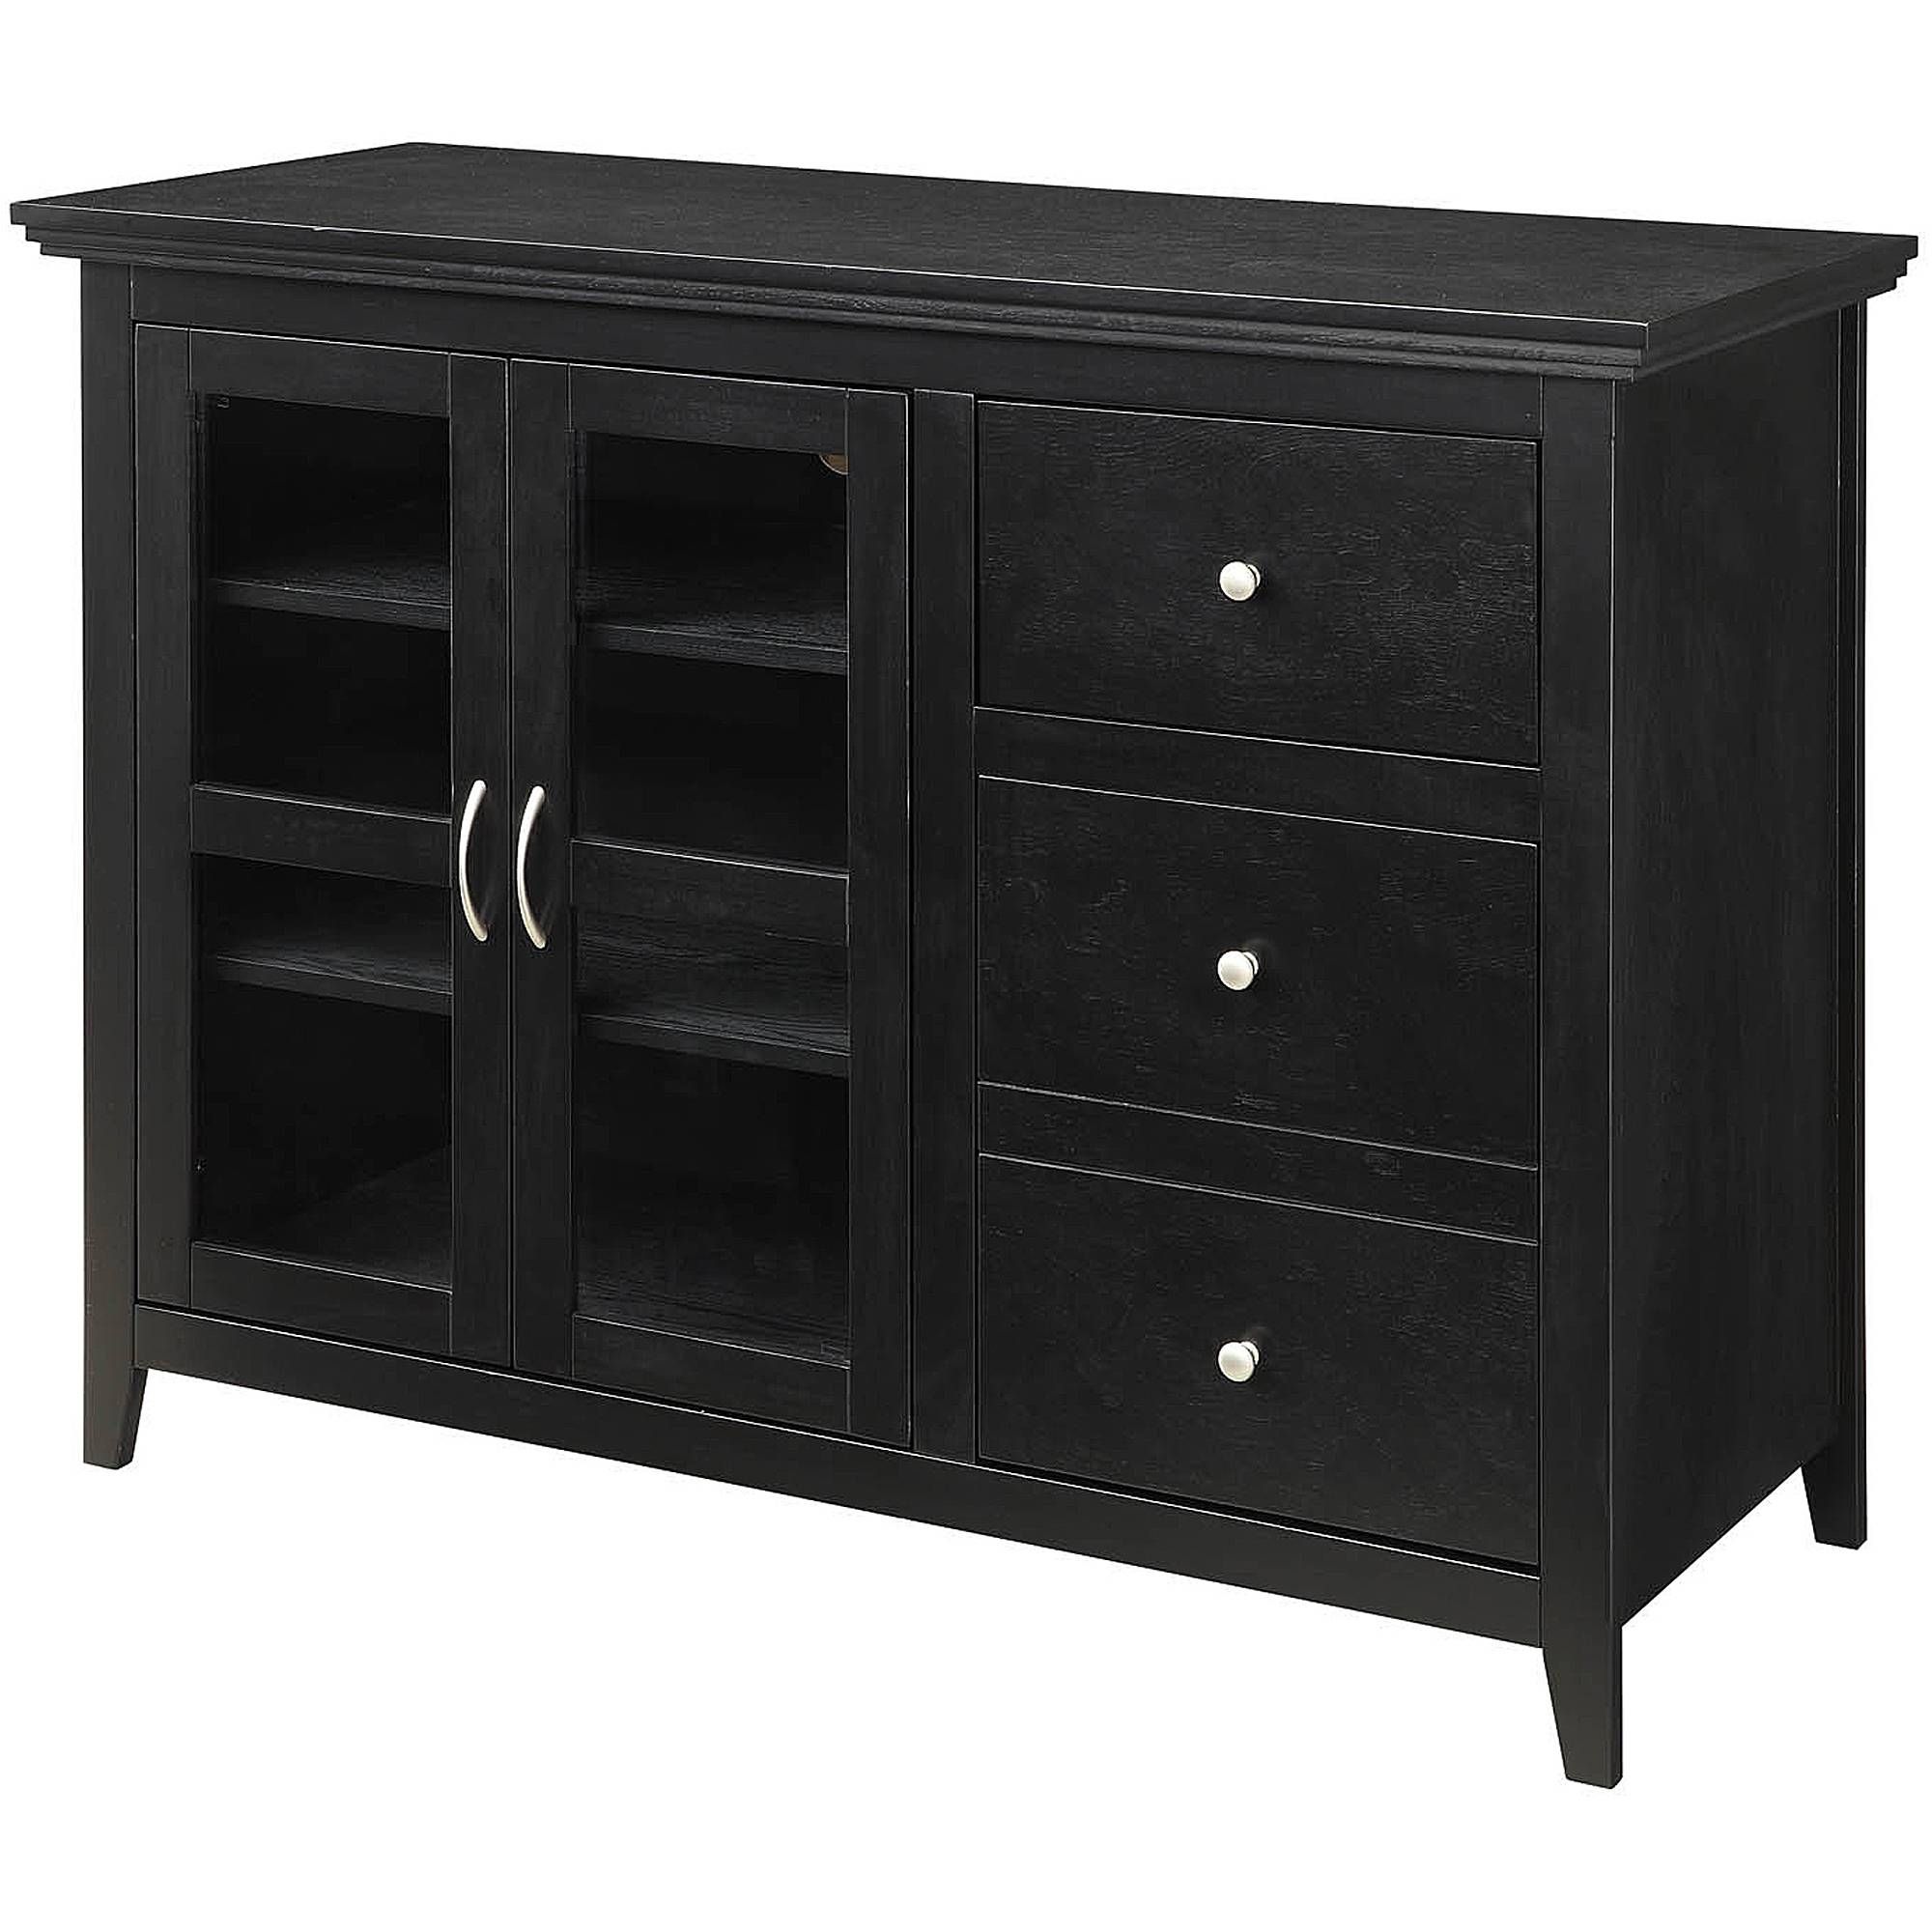 Convenience Concepts Sierra Highboy Tv Stand For Tvs Up To 50 Within Tv Sideboards (View 21 of 30)